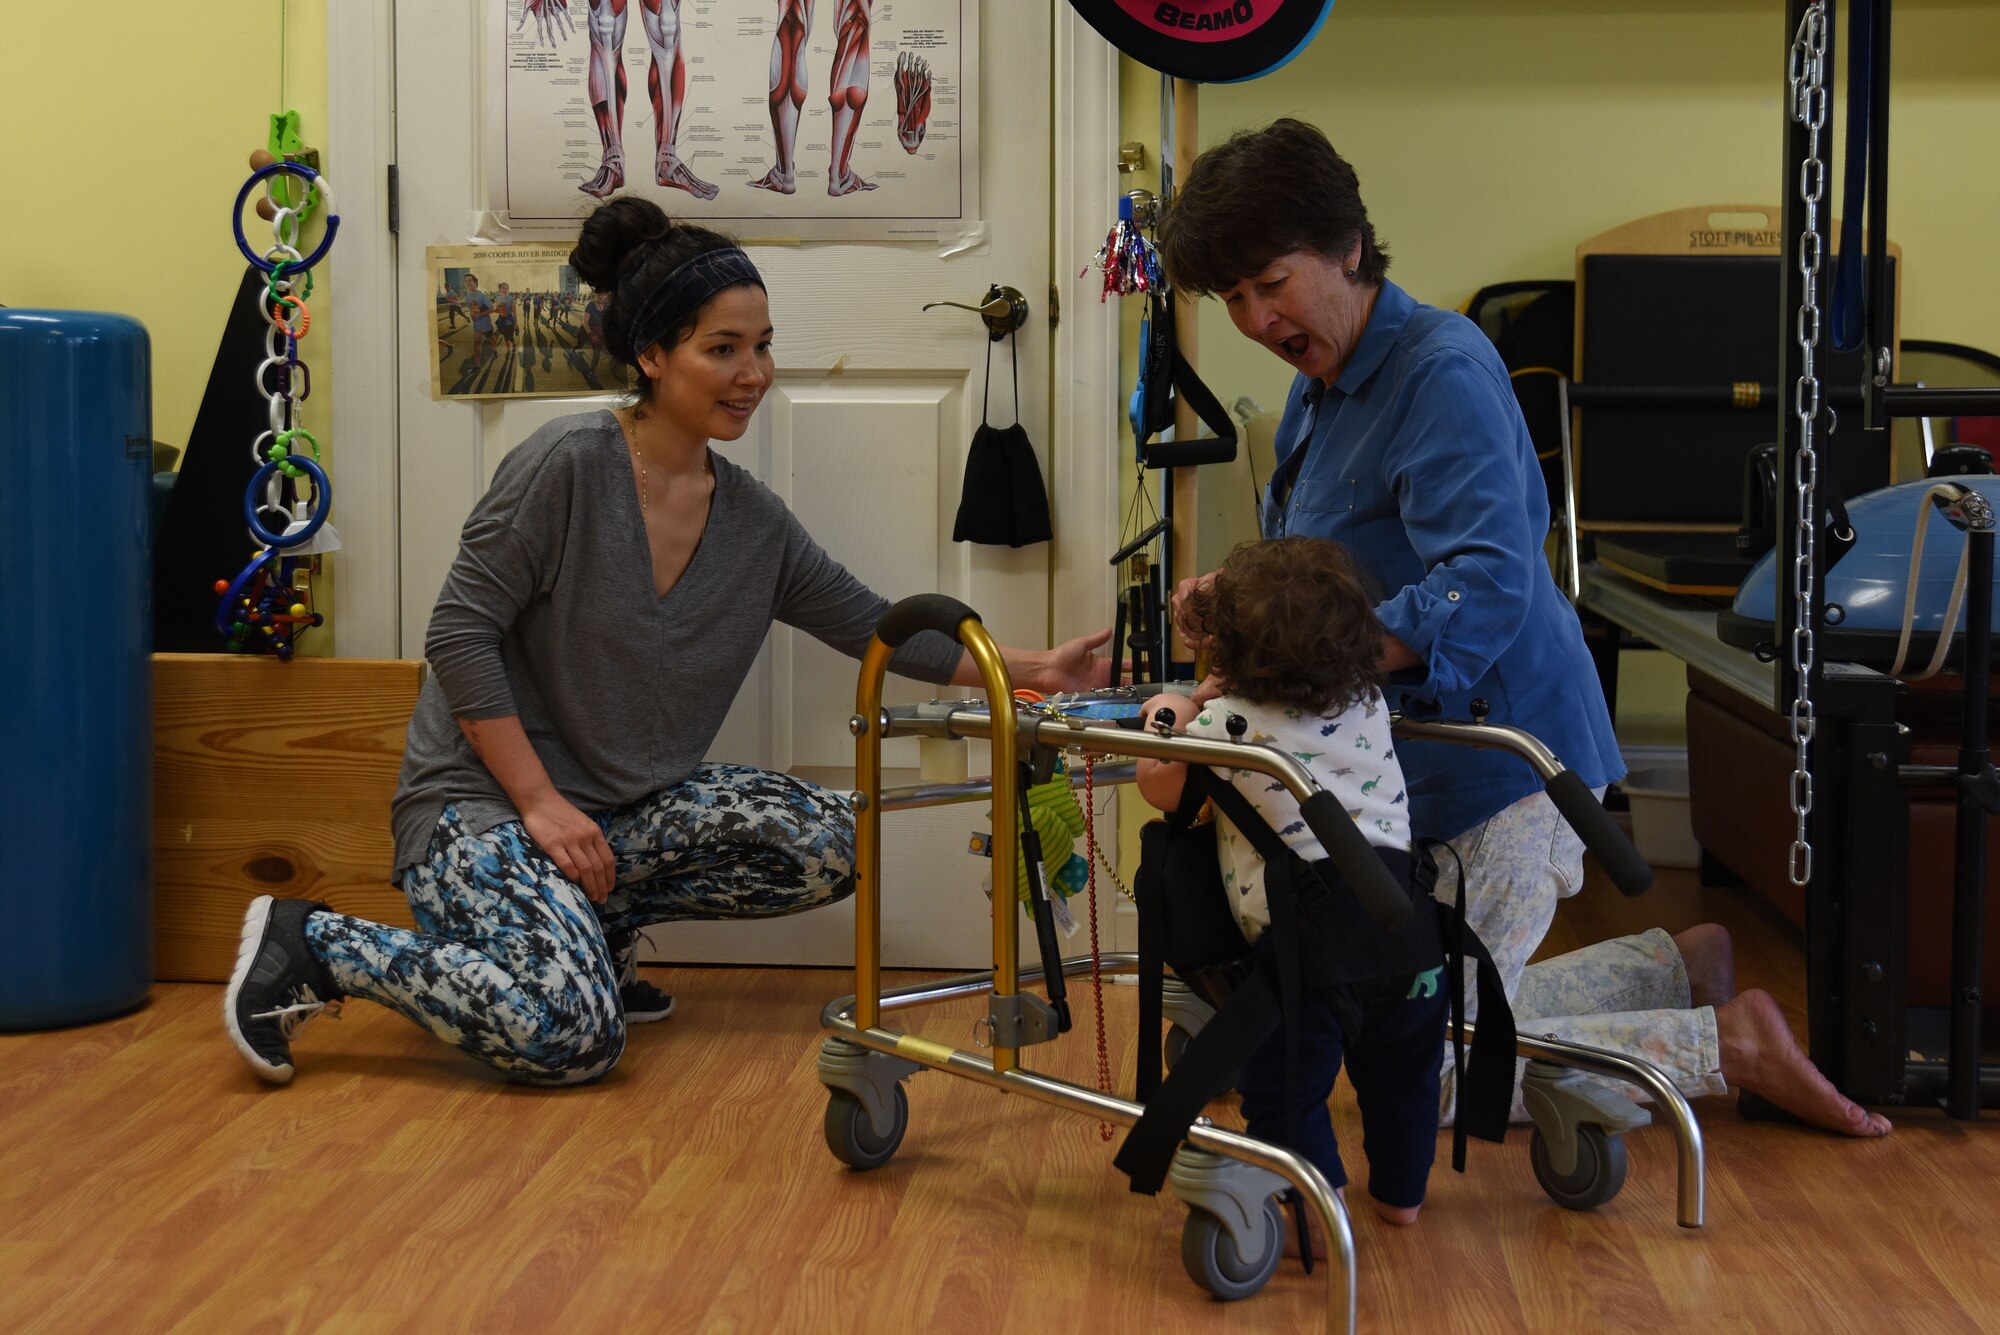 Ashley Mockovciak, Team Shaw spouse, left, rings a bell to attract the attention of her son, Noah Mockovciak, as Kathleen Ganley, physical therapist, guides his walker in a physical therapy office at Columbia, S.C., March 1, 2018.